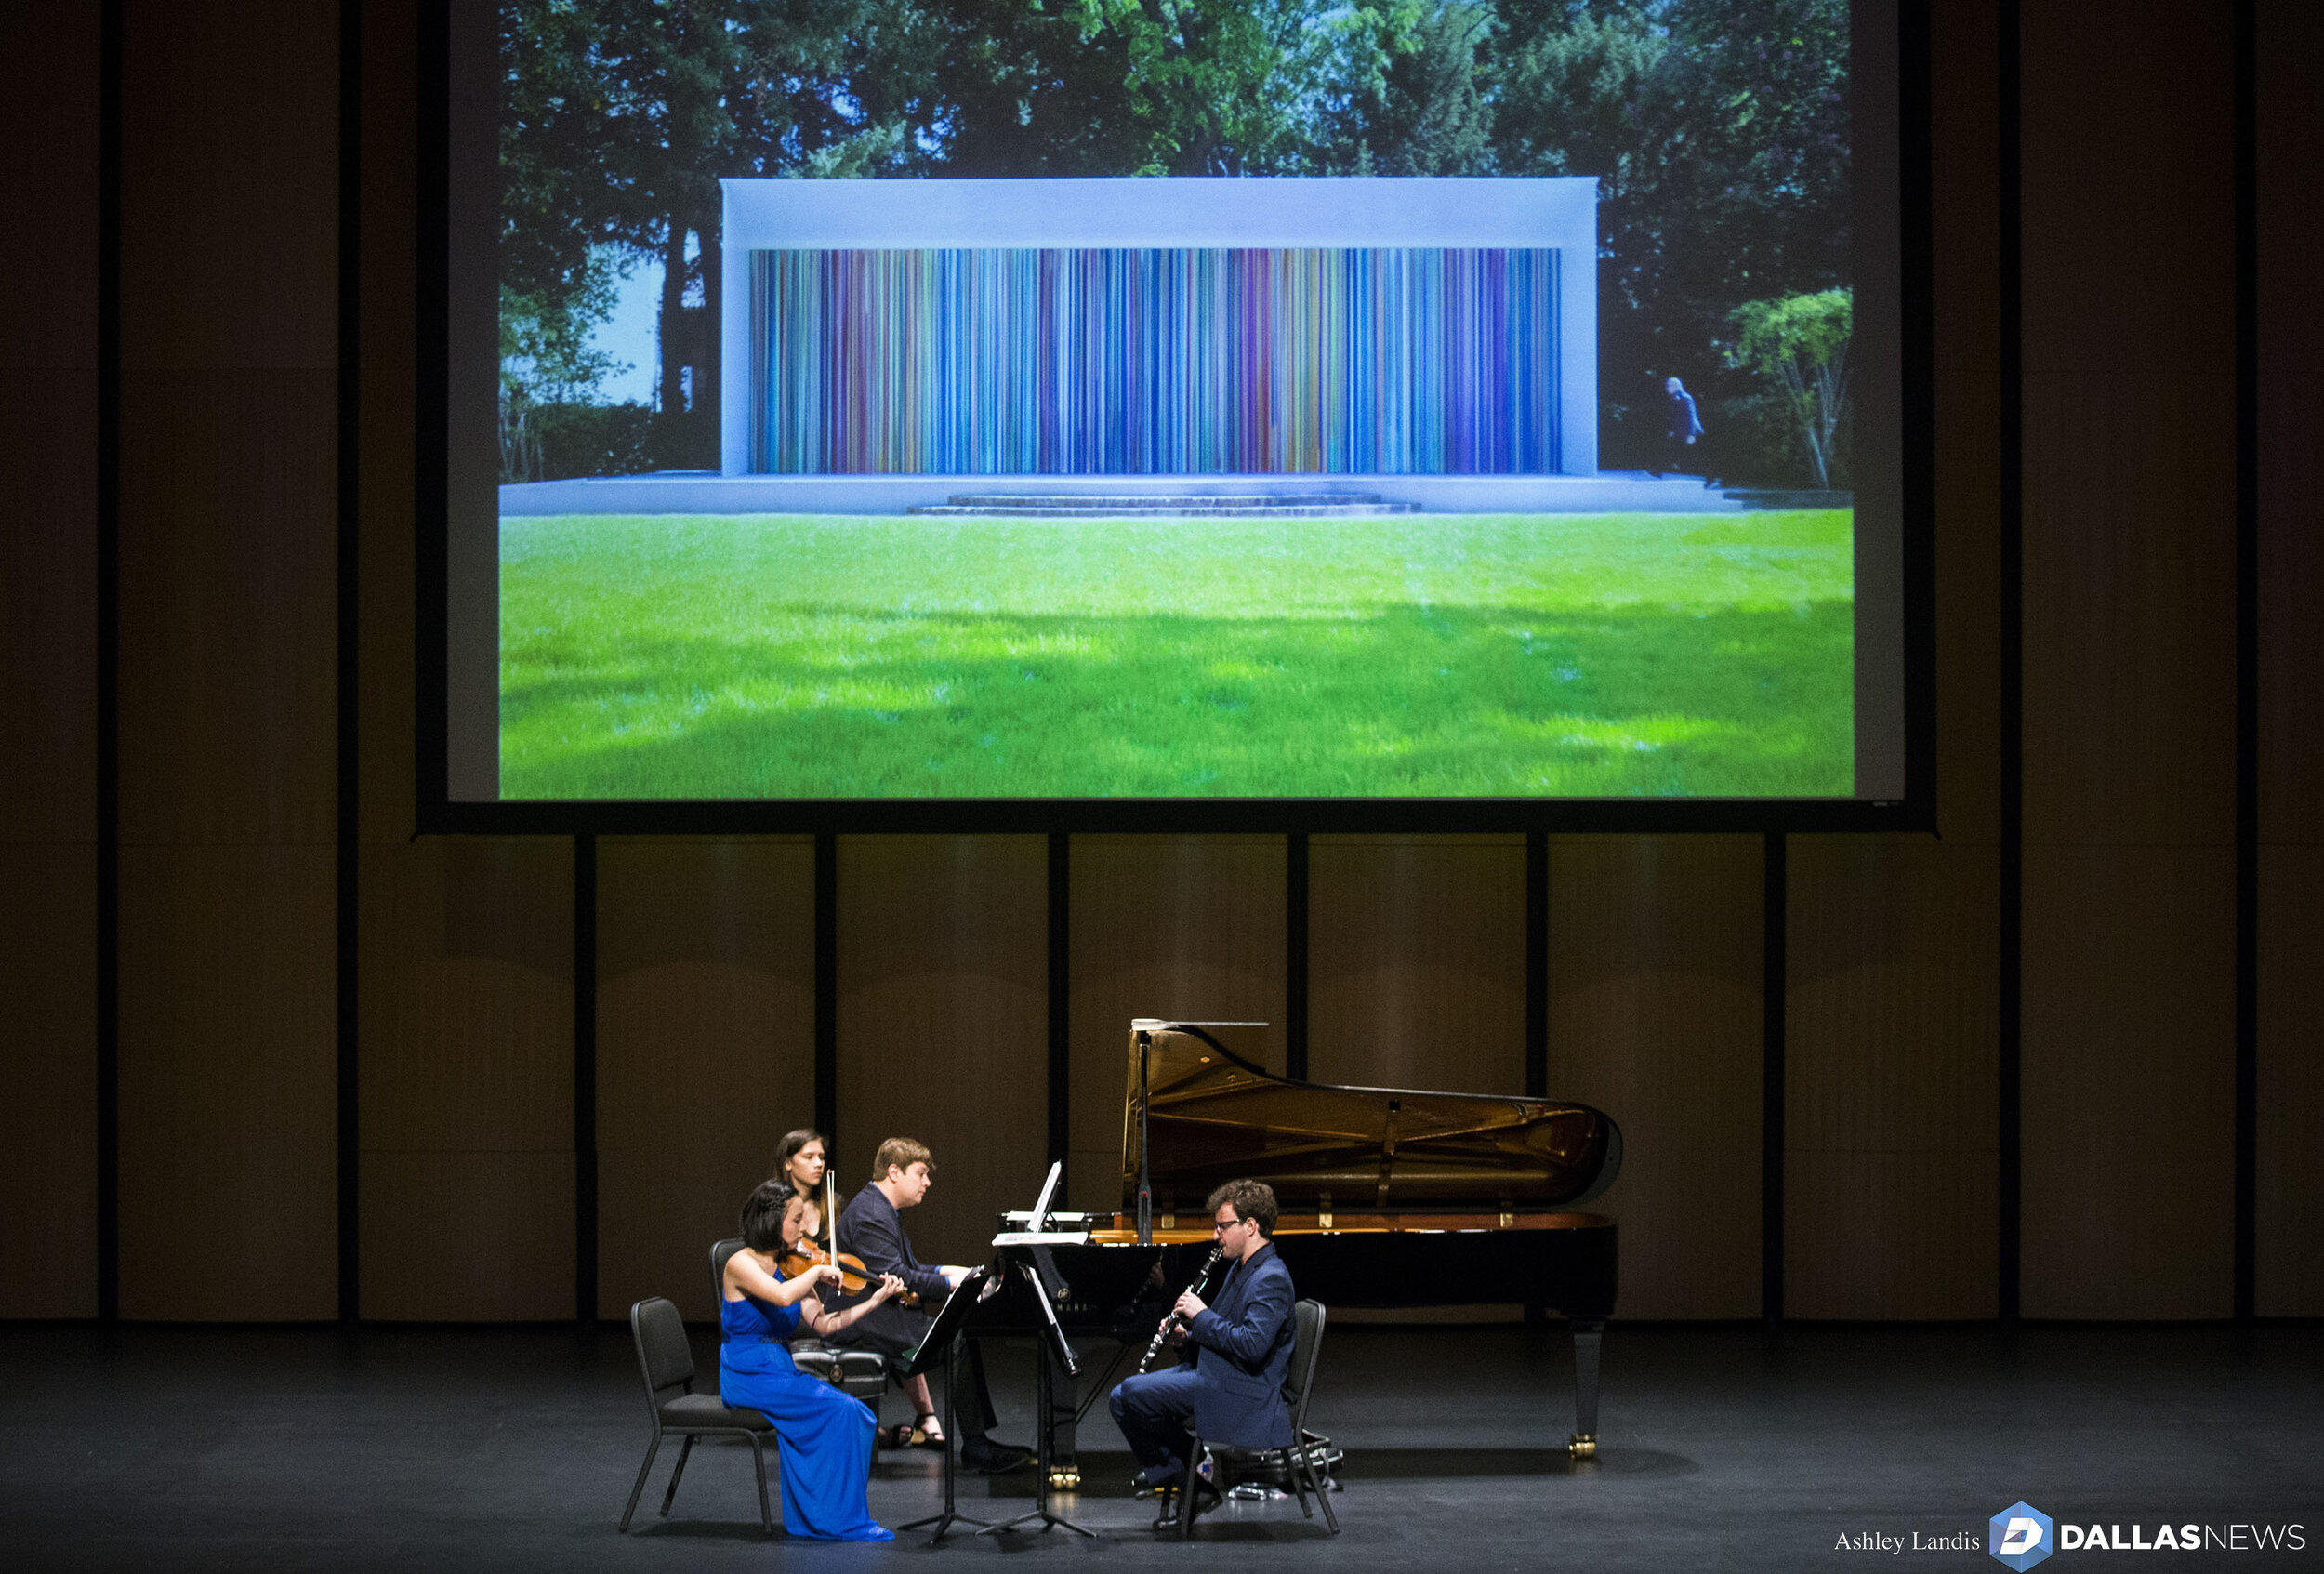  Violinist Grace Kang Wollett, pianist Mikhail Berestnev and clarinetist Danny Goldman rehearse under a photo of "Horizons," artwork by Ian Davenport, before a Basically Beethoven Festival concert on Sunday, July 7, 2019 at Moody Performance Hall in 